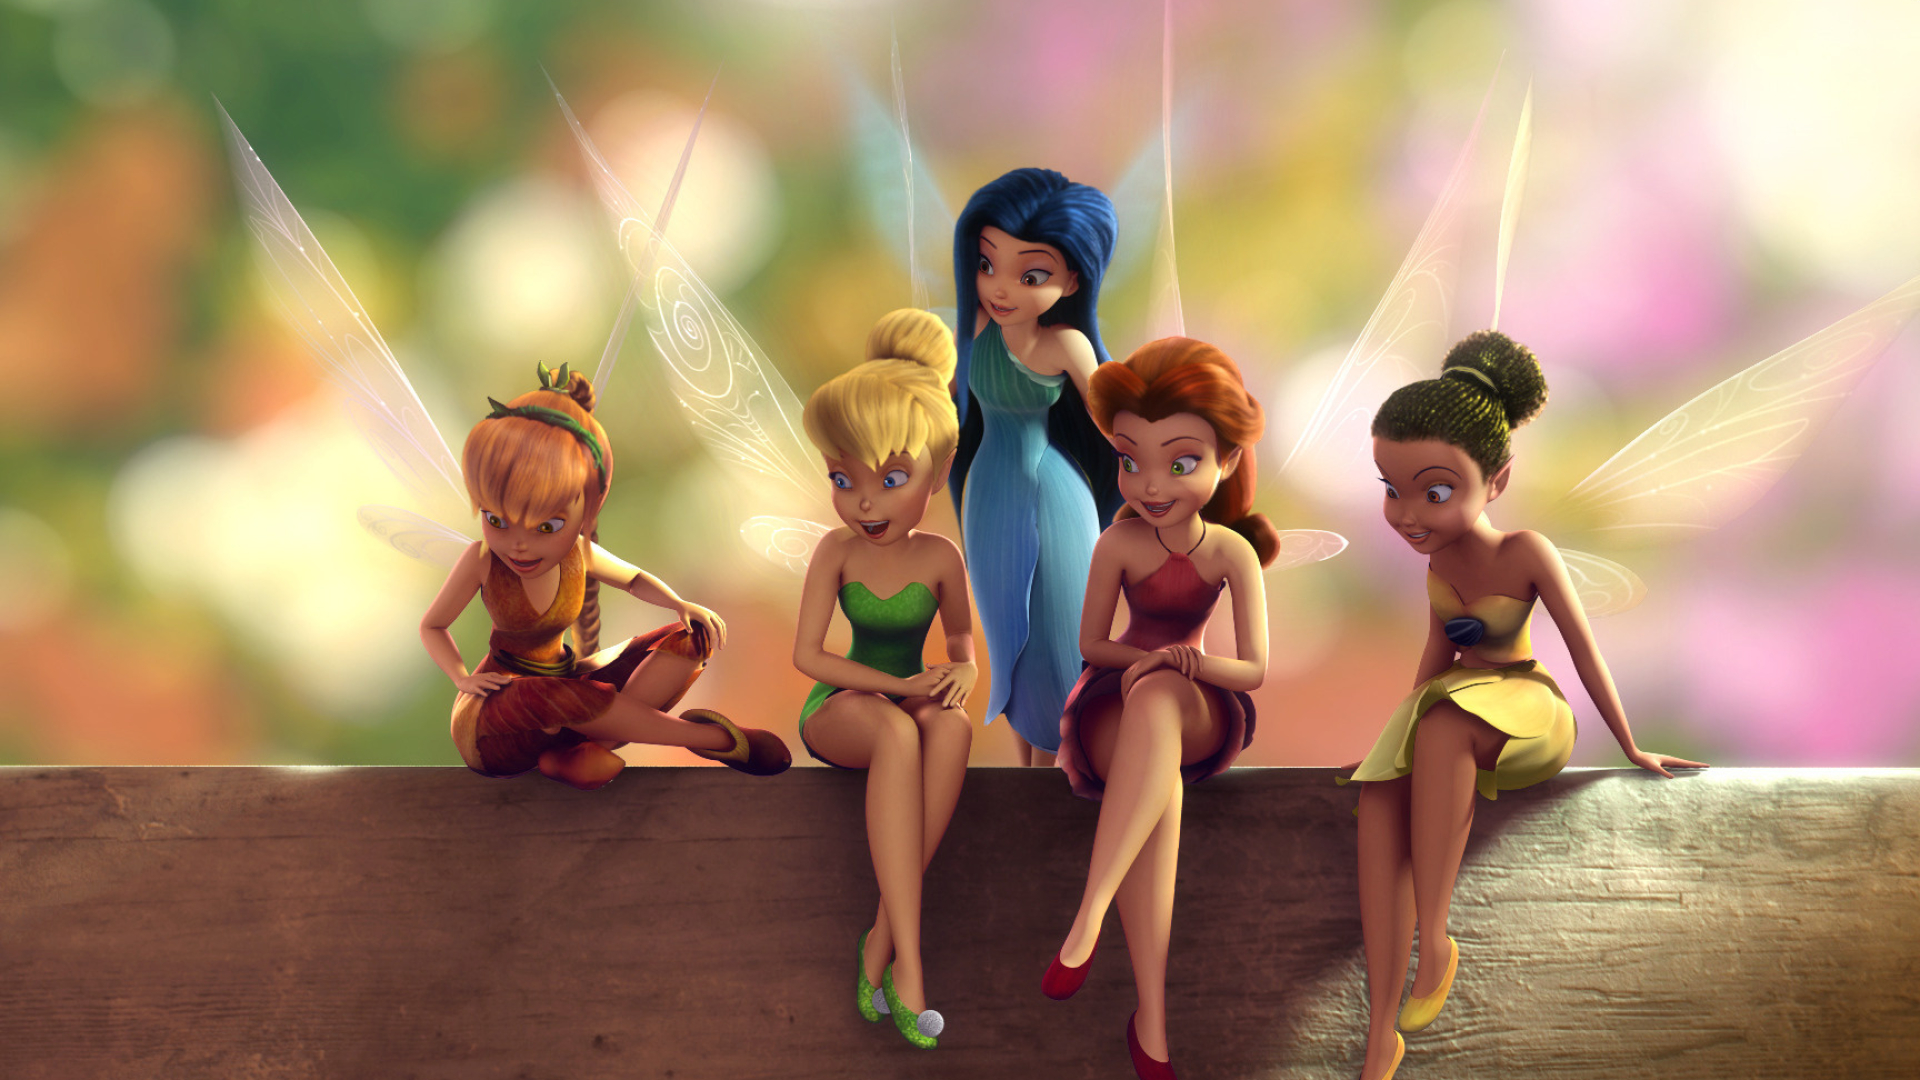 Tinker Bell and the Great Fairy Rescue, Cartoon wallpapers, Disney movie, Magical adventure, 1920x1080 Full HD Desktop